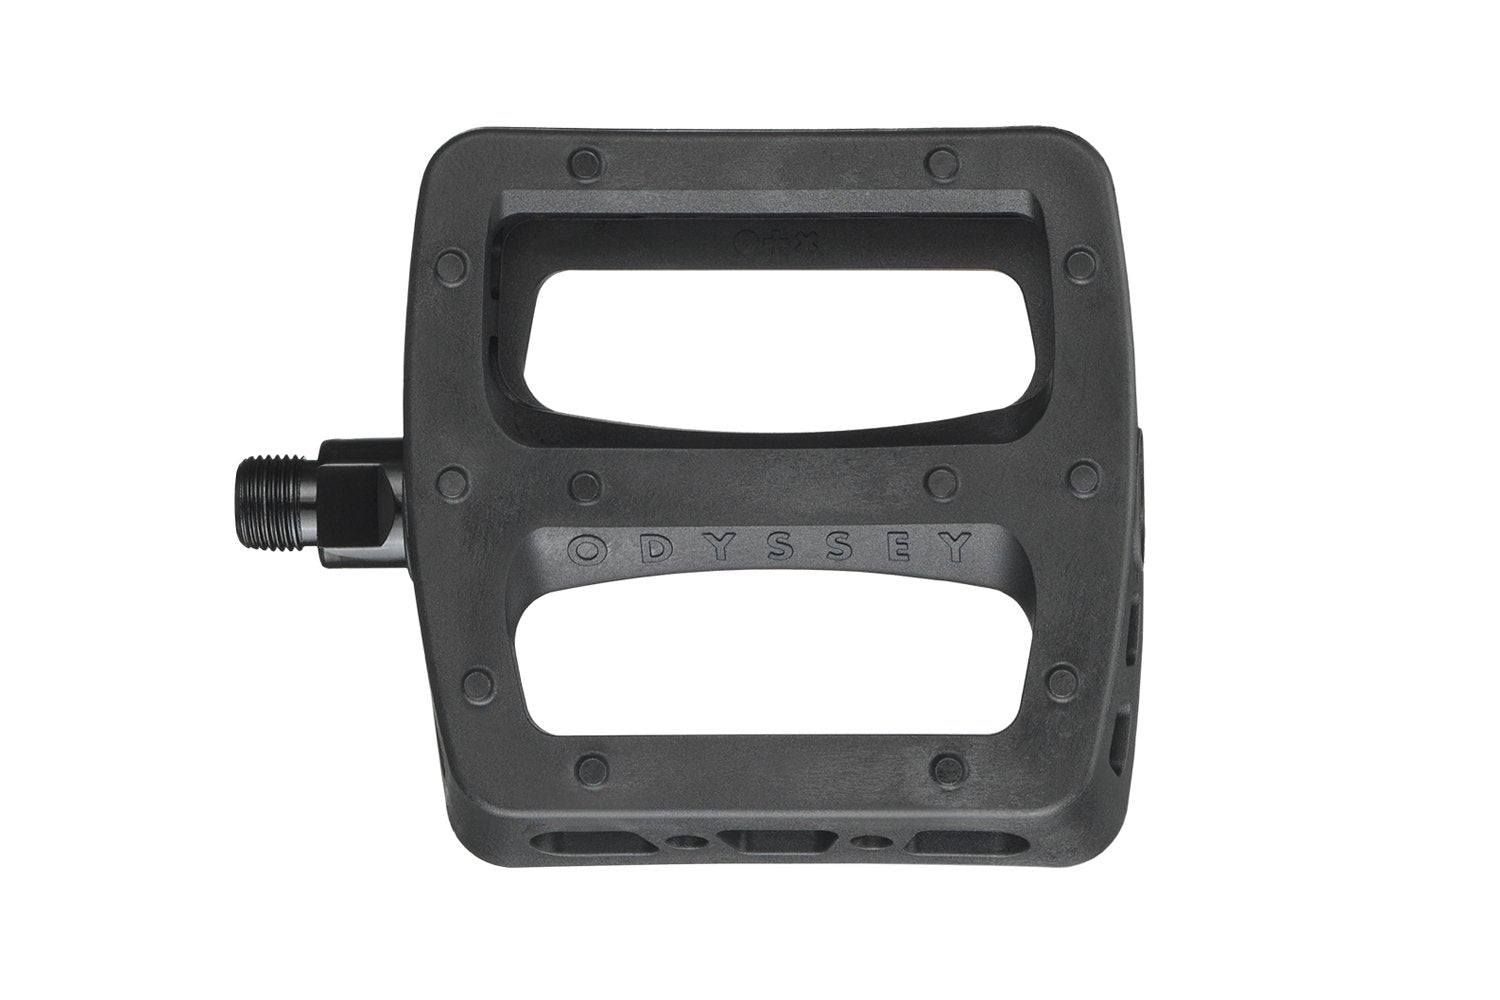 Odyssey Twisted Pro PC Pedals - Black - Downtown Bicycle Works 